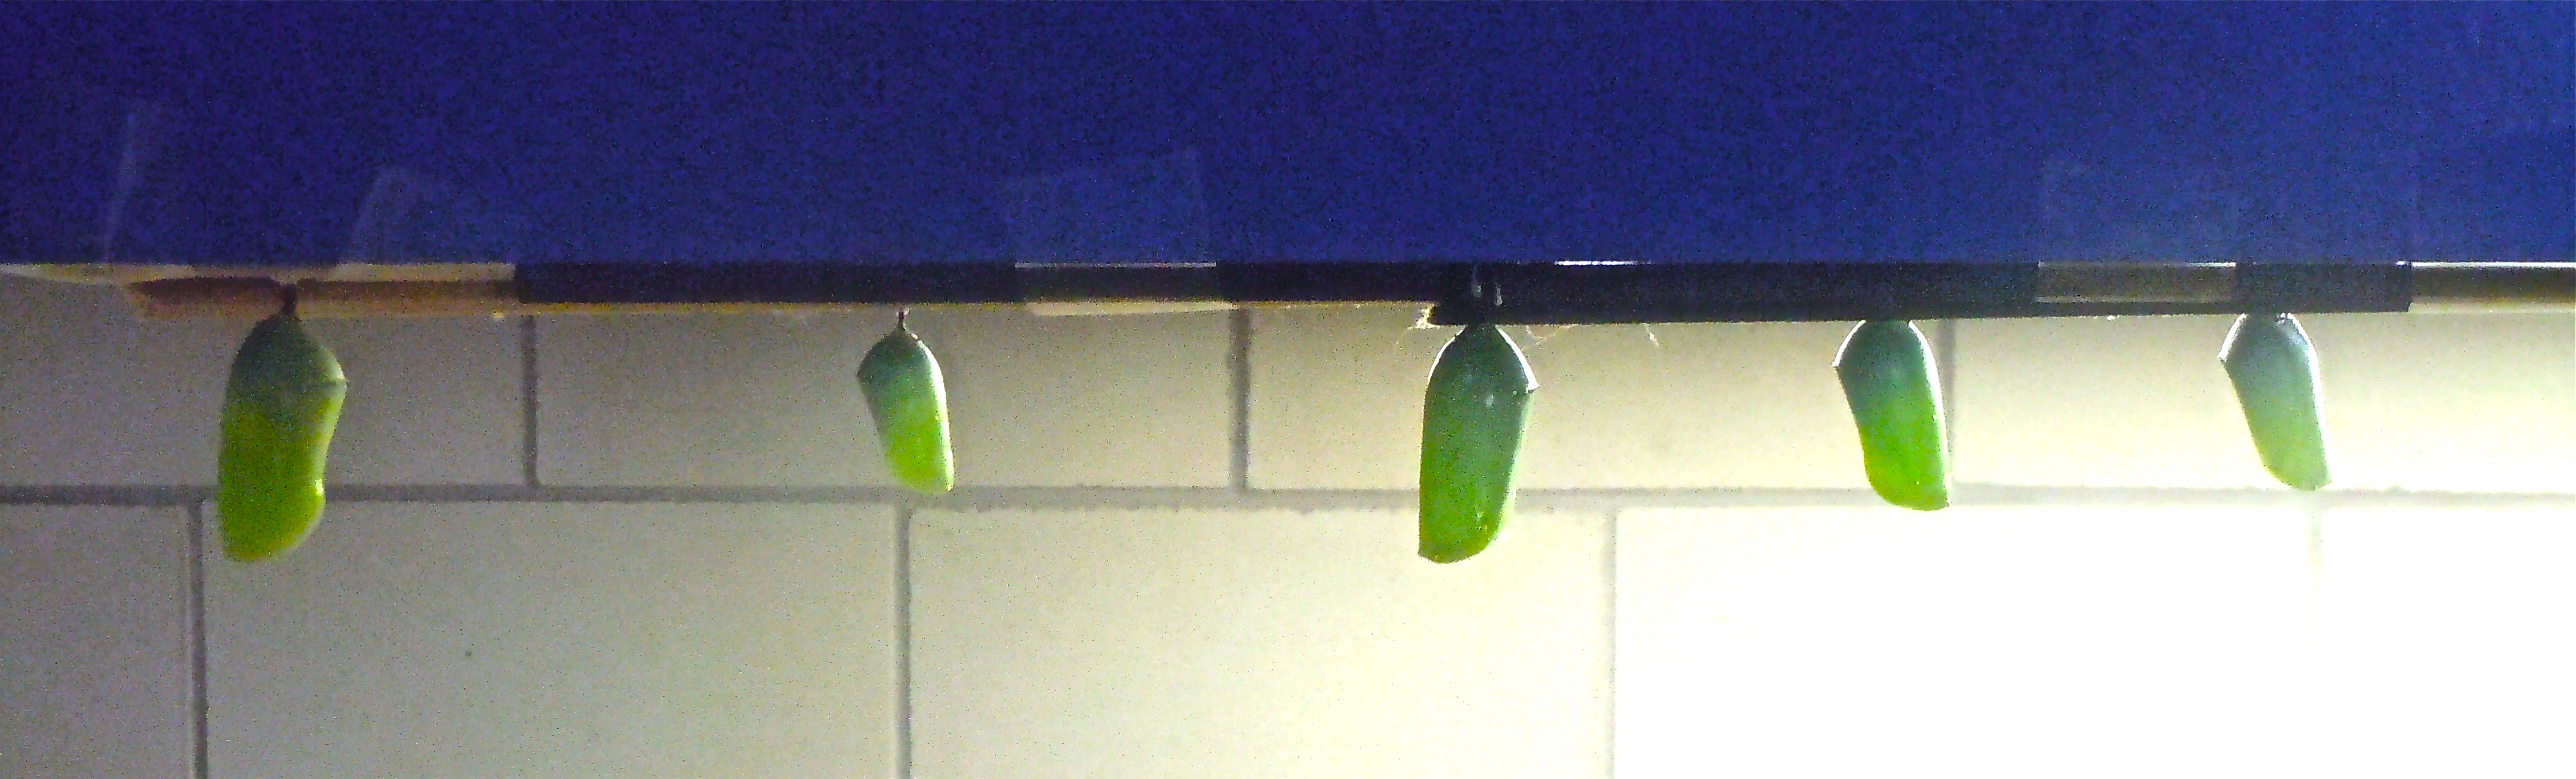 Monarch and Queen Chrysalises taped to Kitchen Counter